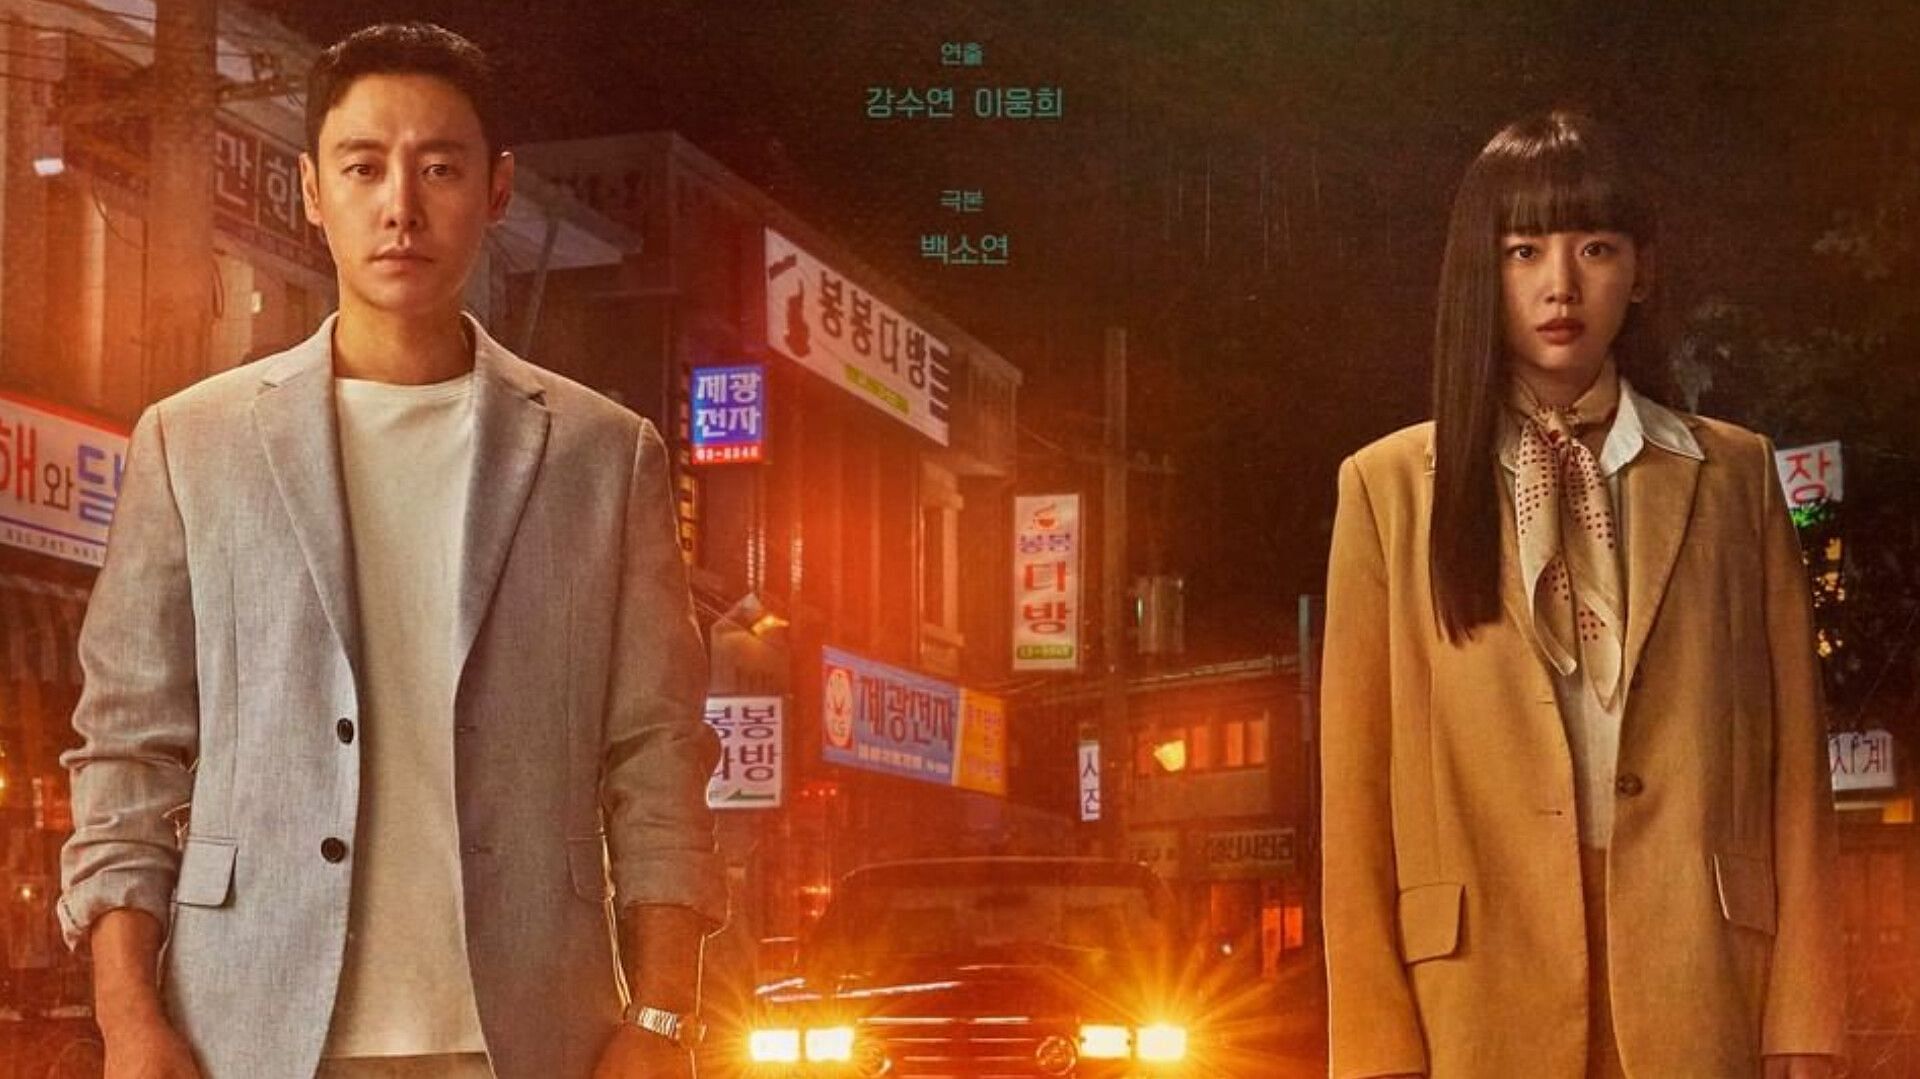 time travel drama Run Into You releases new stills showcasing